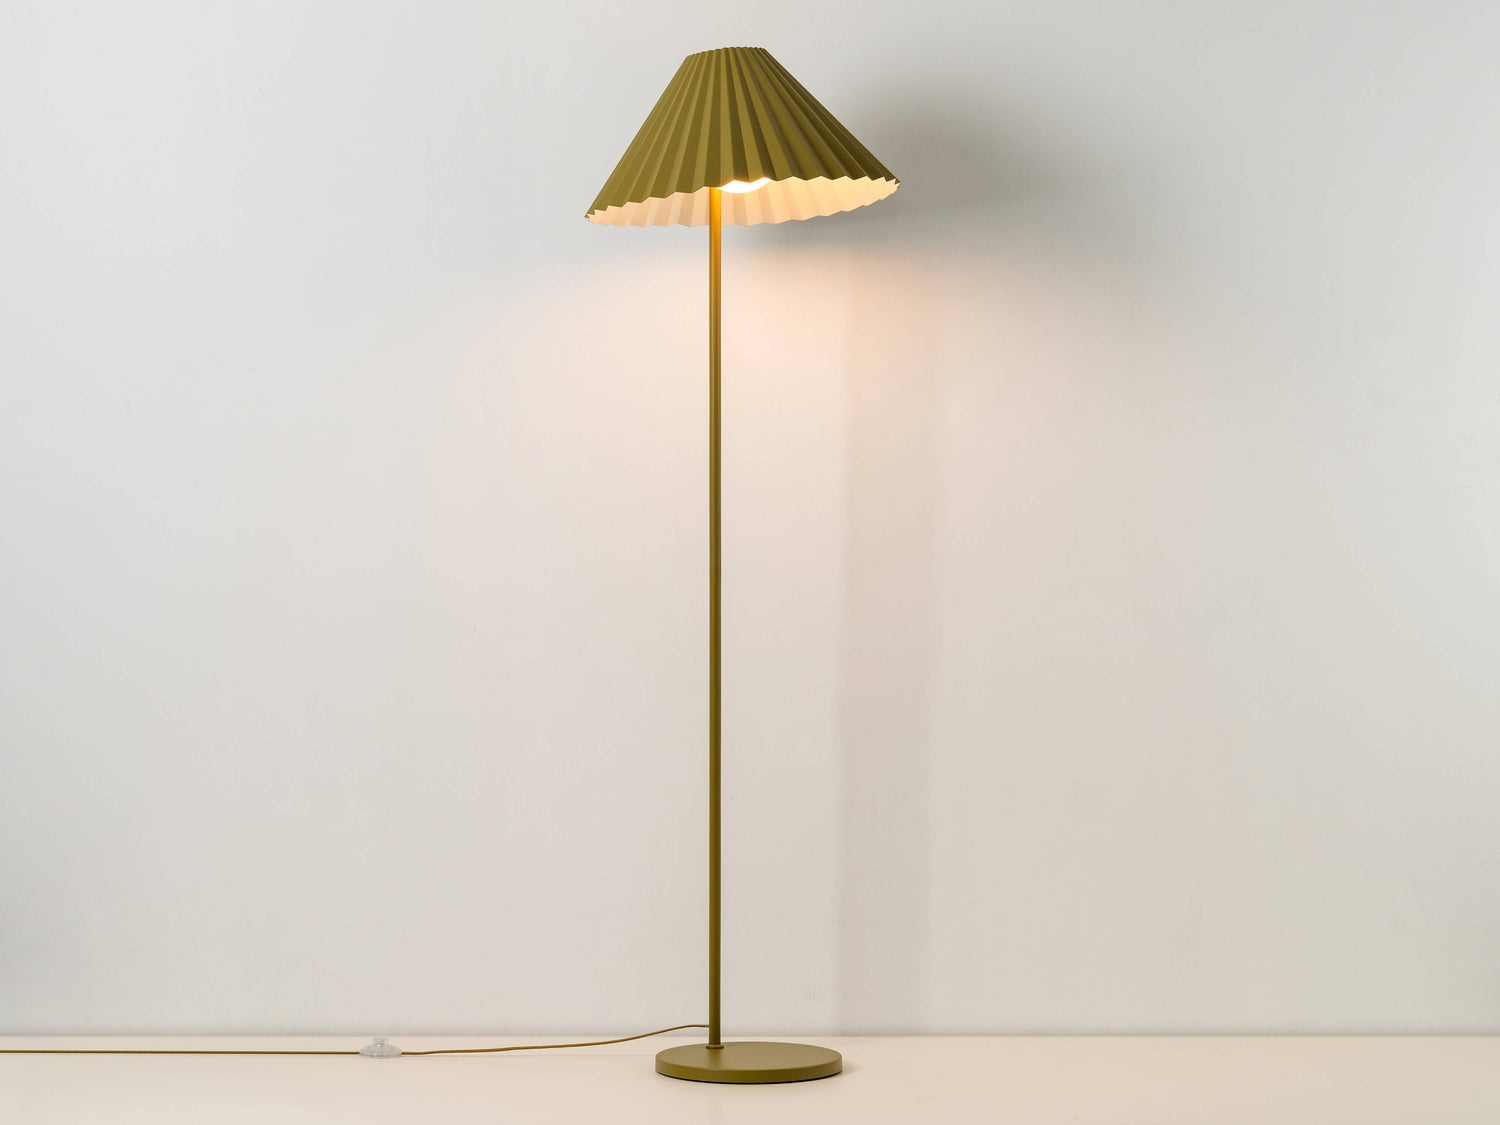 A floor lamp with a fluted, pleated metal shade that can be tilted and adjusted. It is painted moss green, with a contrasting pale blue colour inside the shade. The light is on.